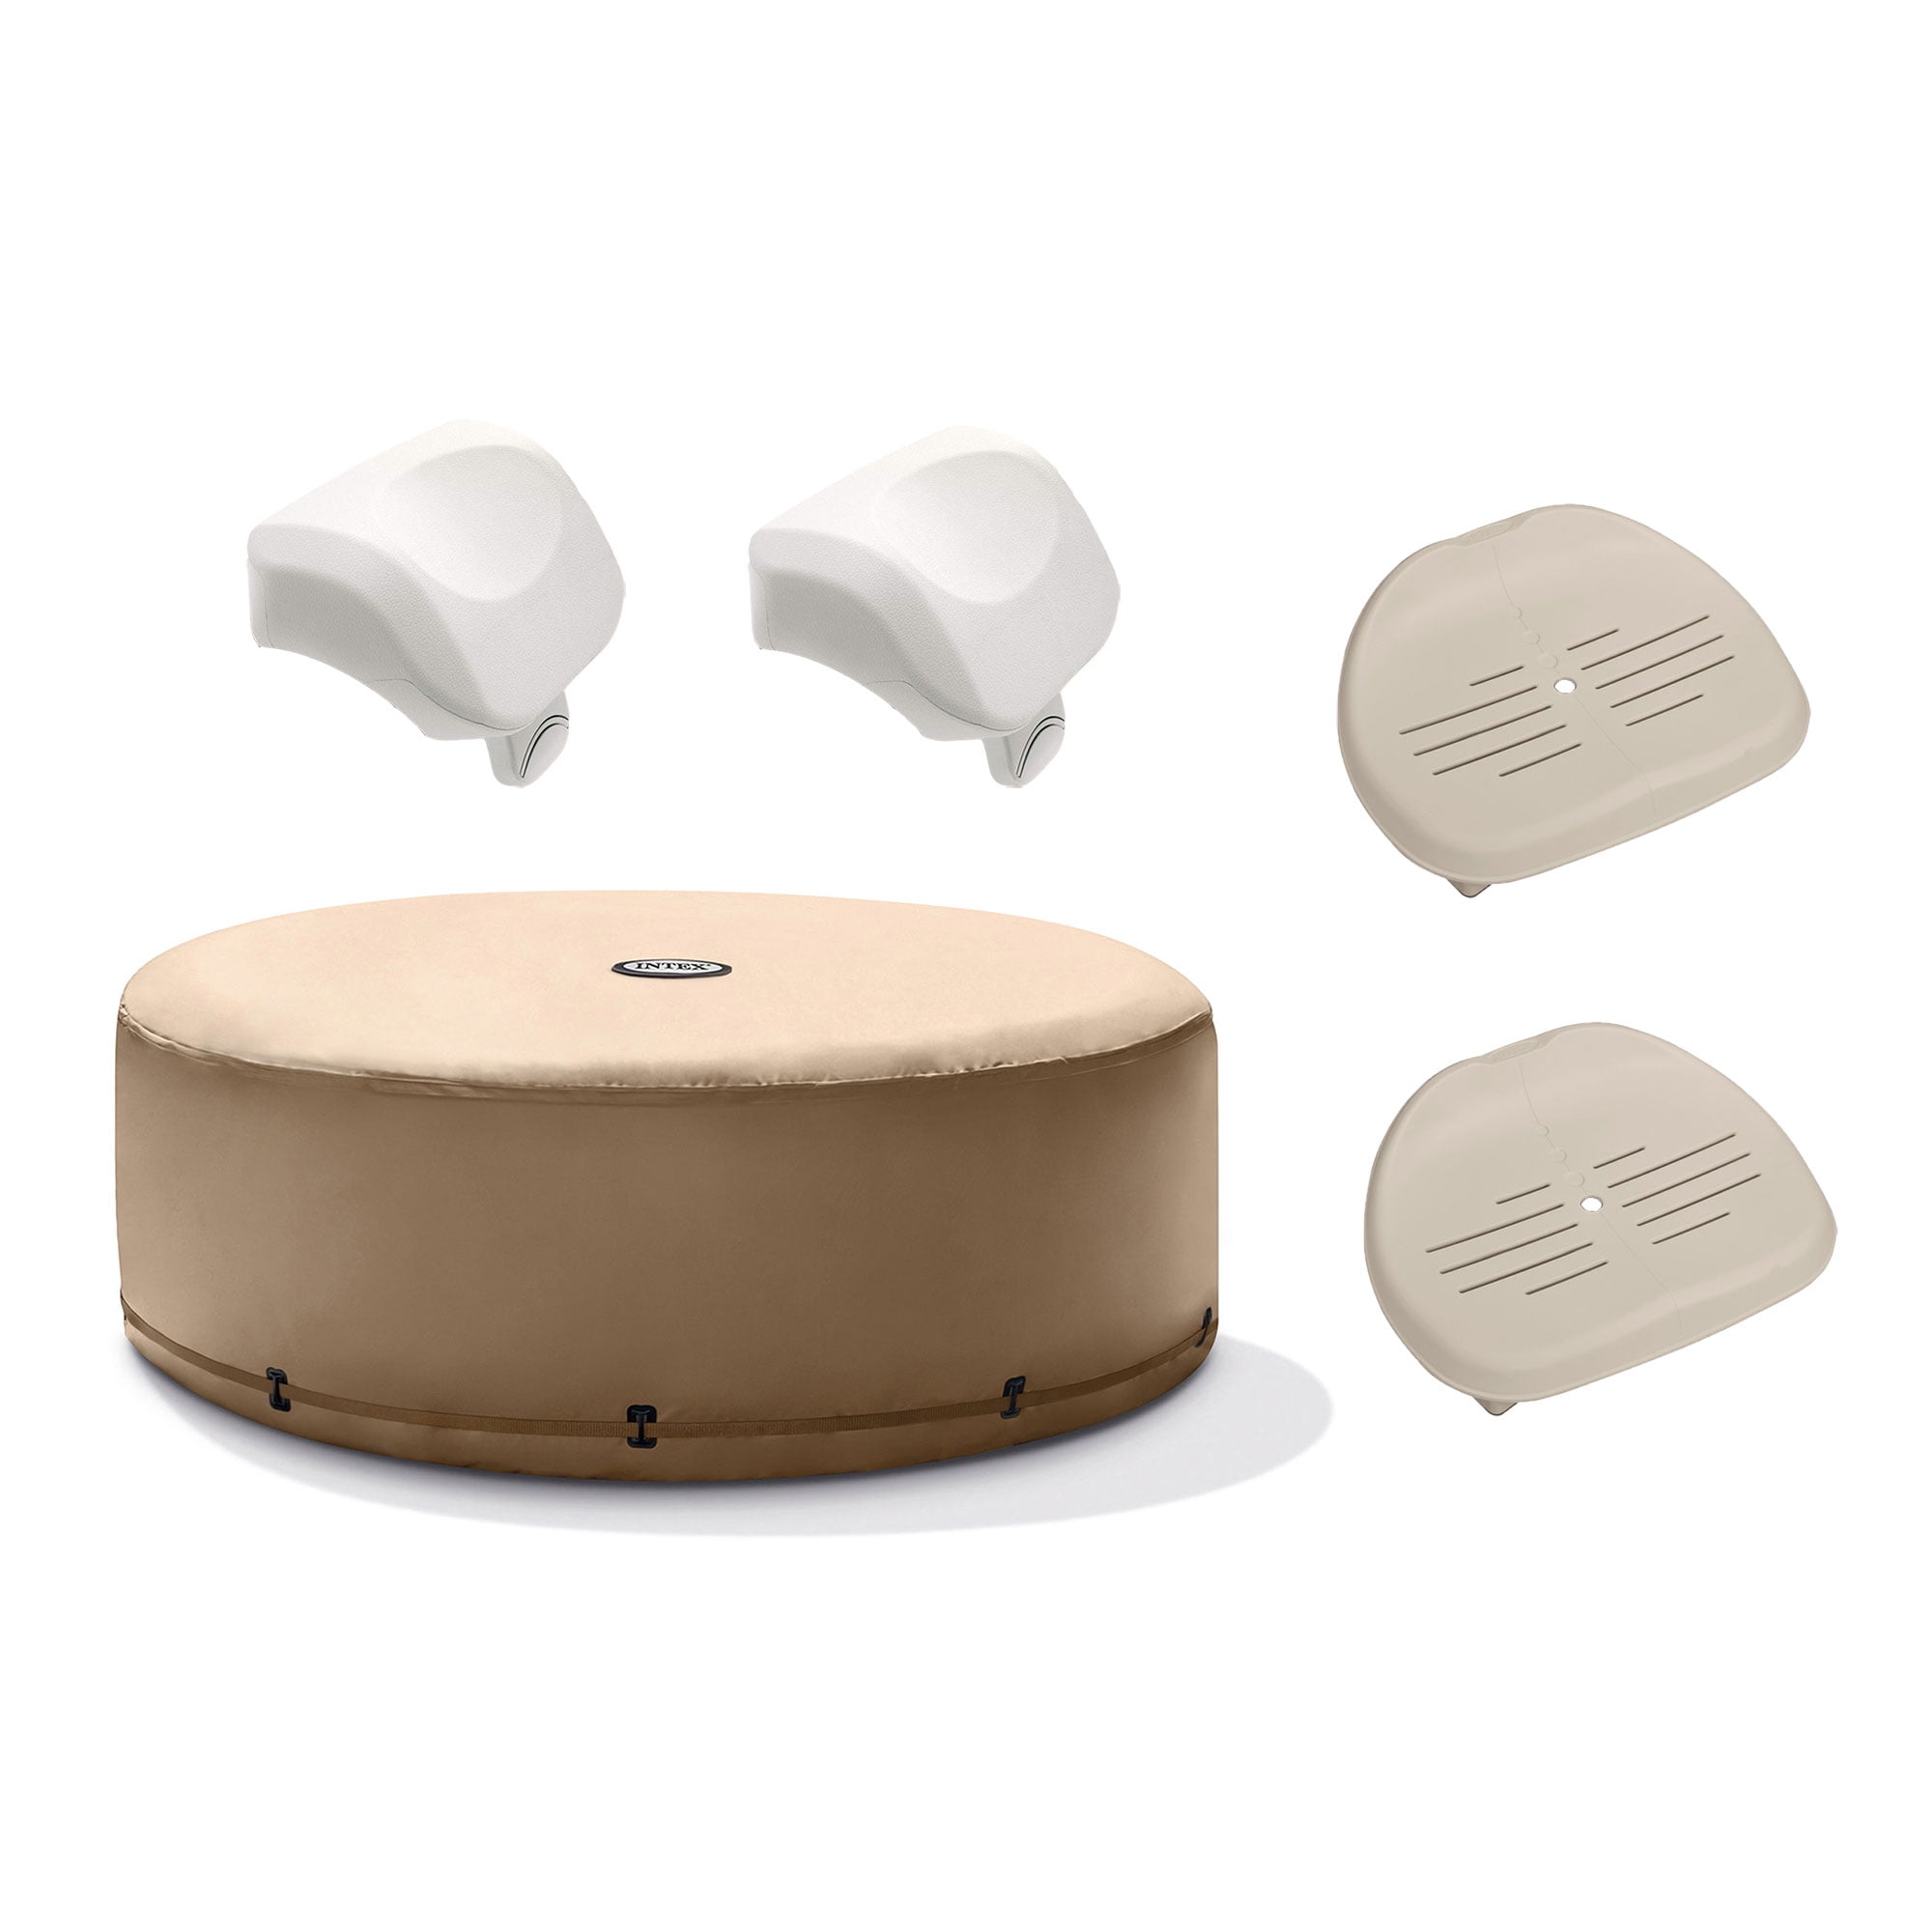 Intex PureSpa Hot Tub Cover with Foam Headrest (2 Pack) and Seat (2 Pack)